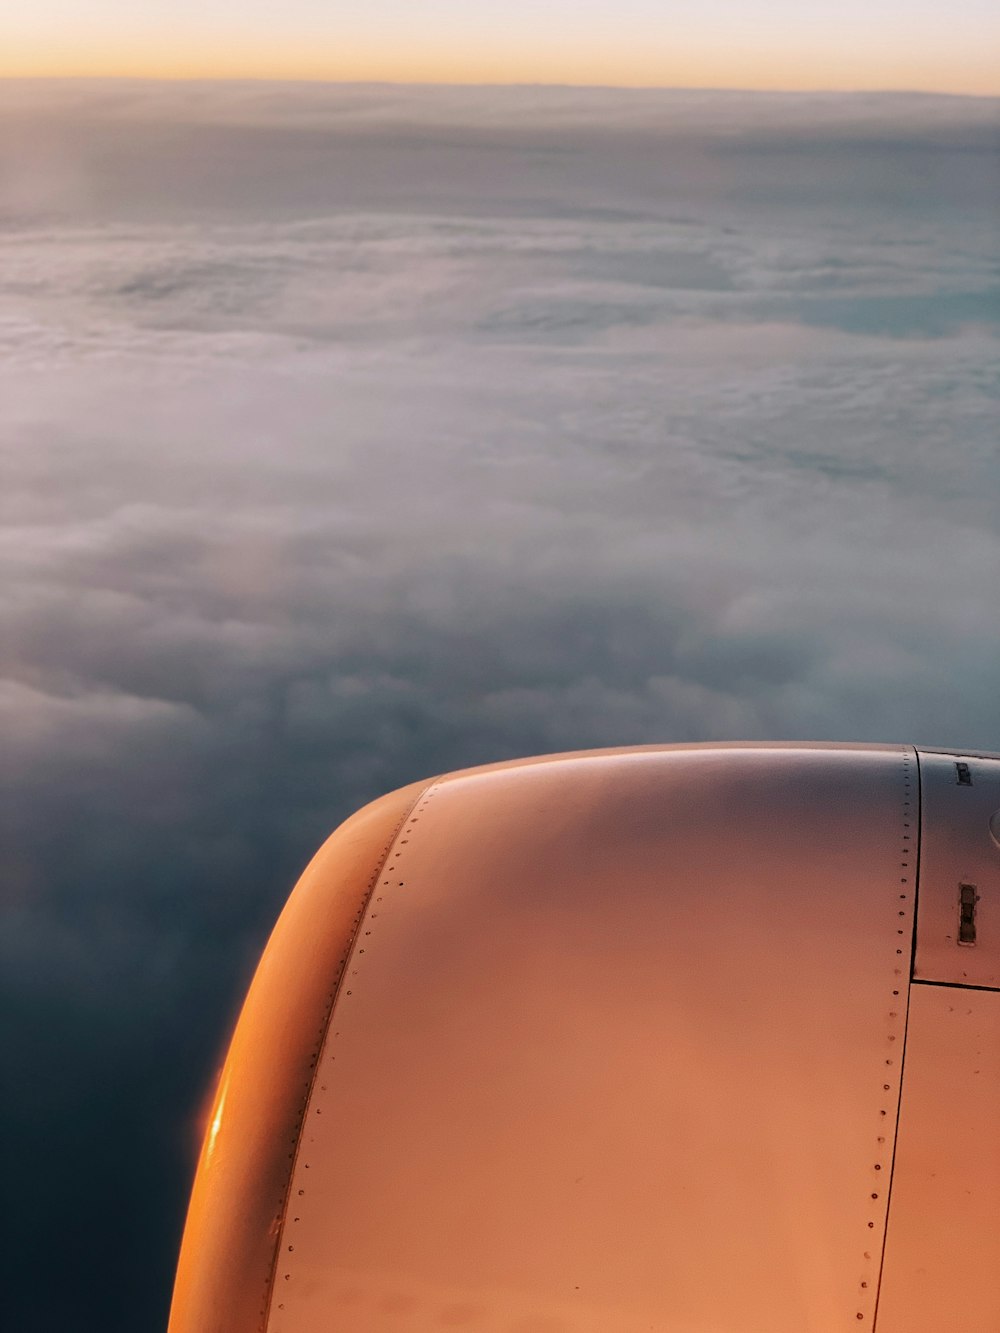 person riding airliner with view of right engine during golden hour